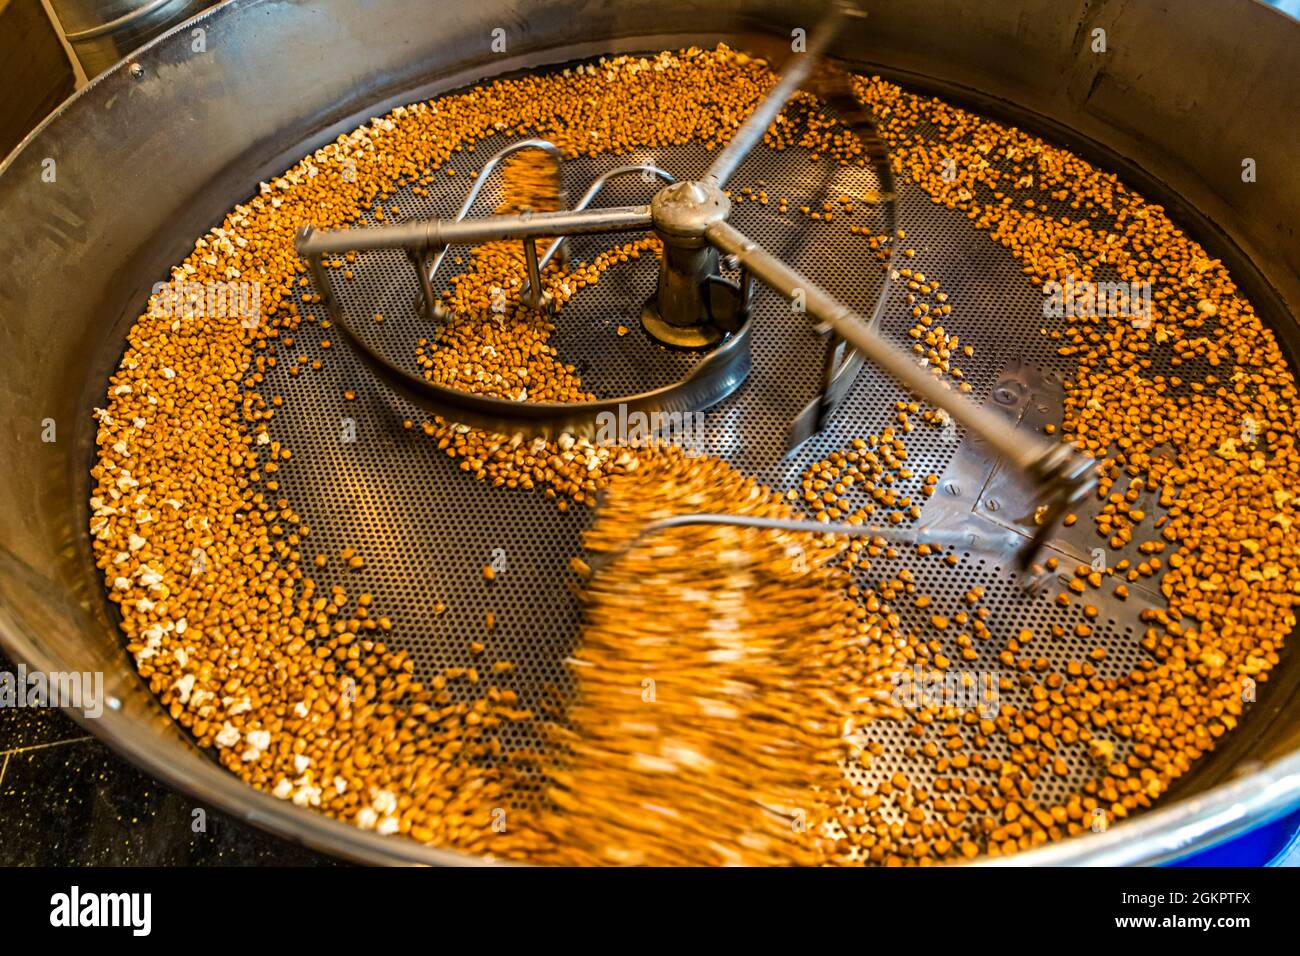 The roasted corn kernels cool as they are constantly moved. In a coffee roasting machine, the corn kernels are roasted at 200 degrees. When about 1/3 of the grains are popped, the perfect degree of roasting for Farina Bona is reached. Circolo d'Onsernone, Switzerland Stock Photo